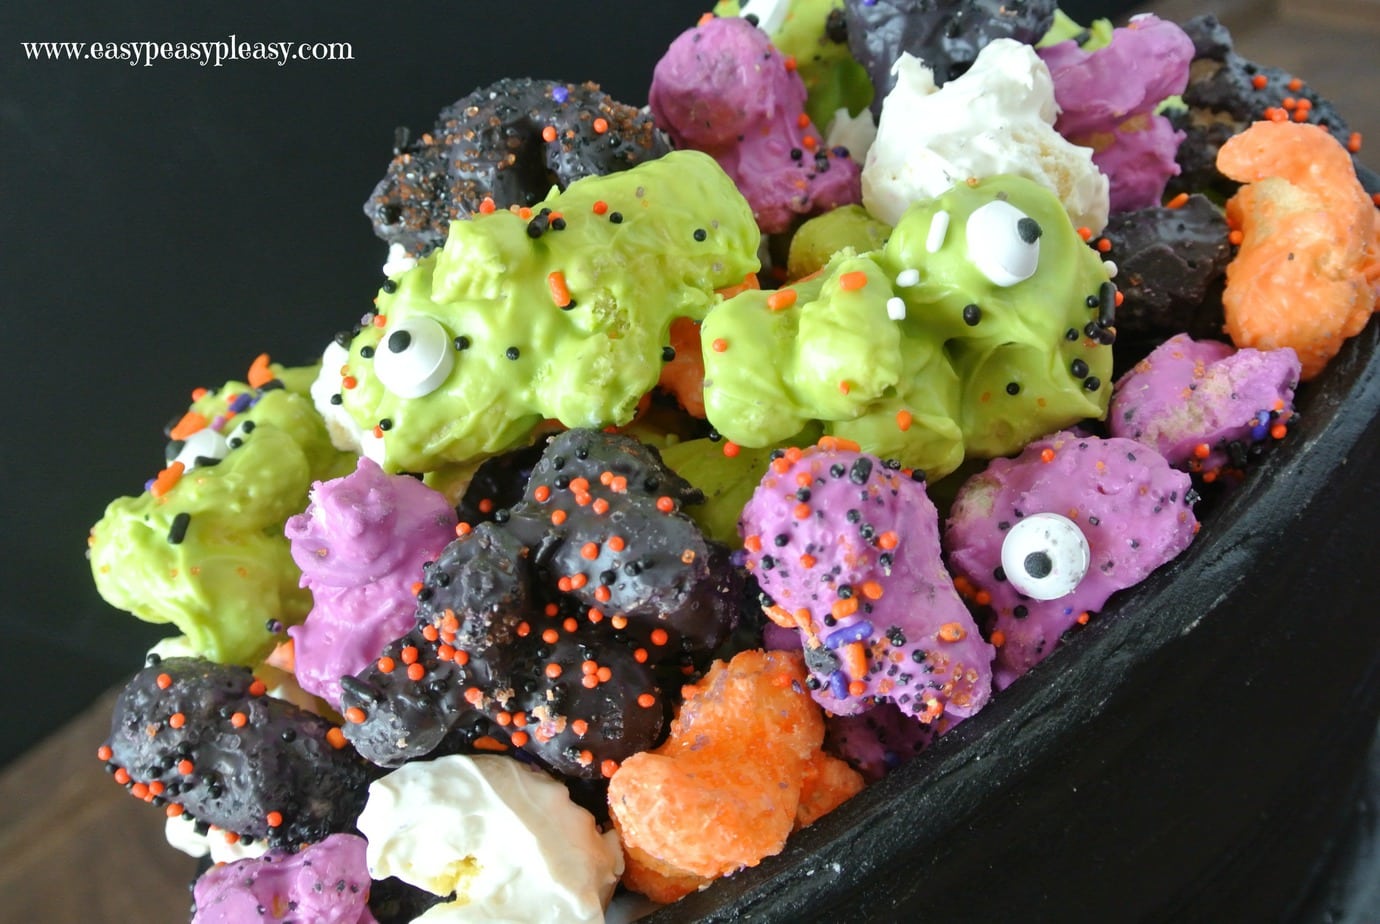 https://easypeasypleasy.com/wp-content/uploads/2015/10/you-gotta-try-this-easy-3-ingredient-monster-munch-its-the-perfect-treat-for-halloween.jpg